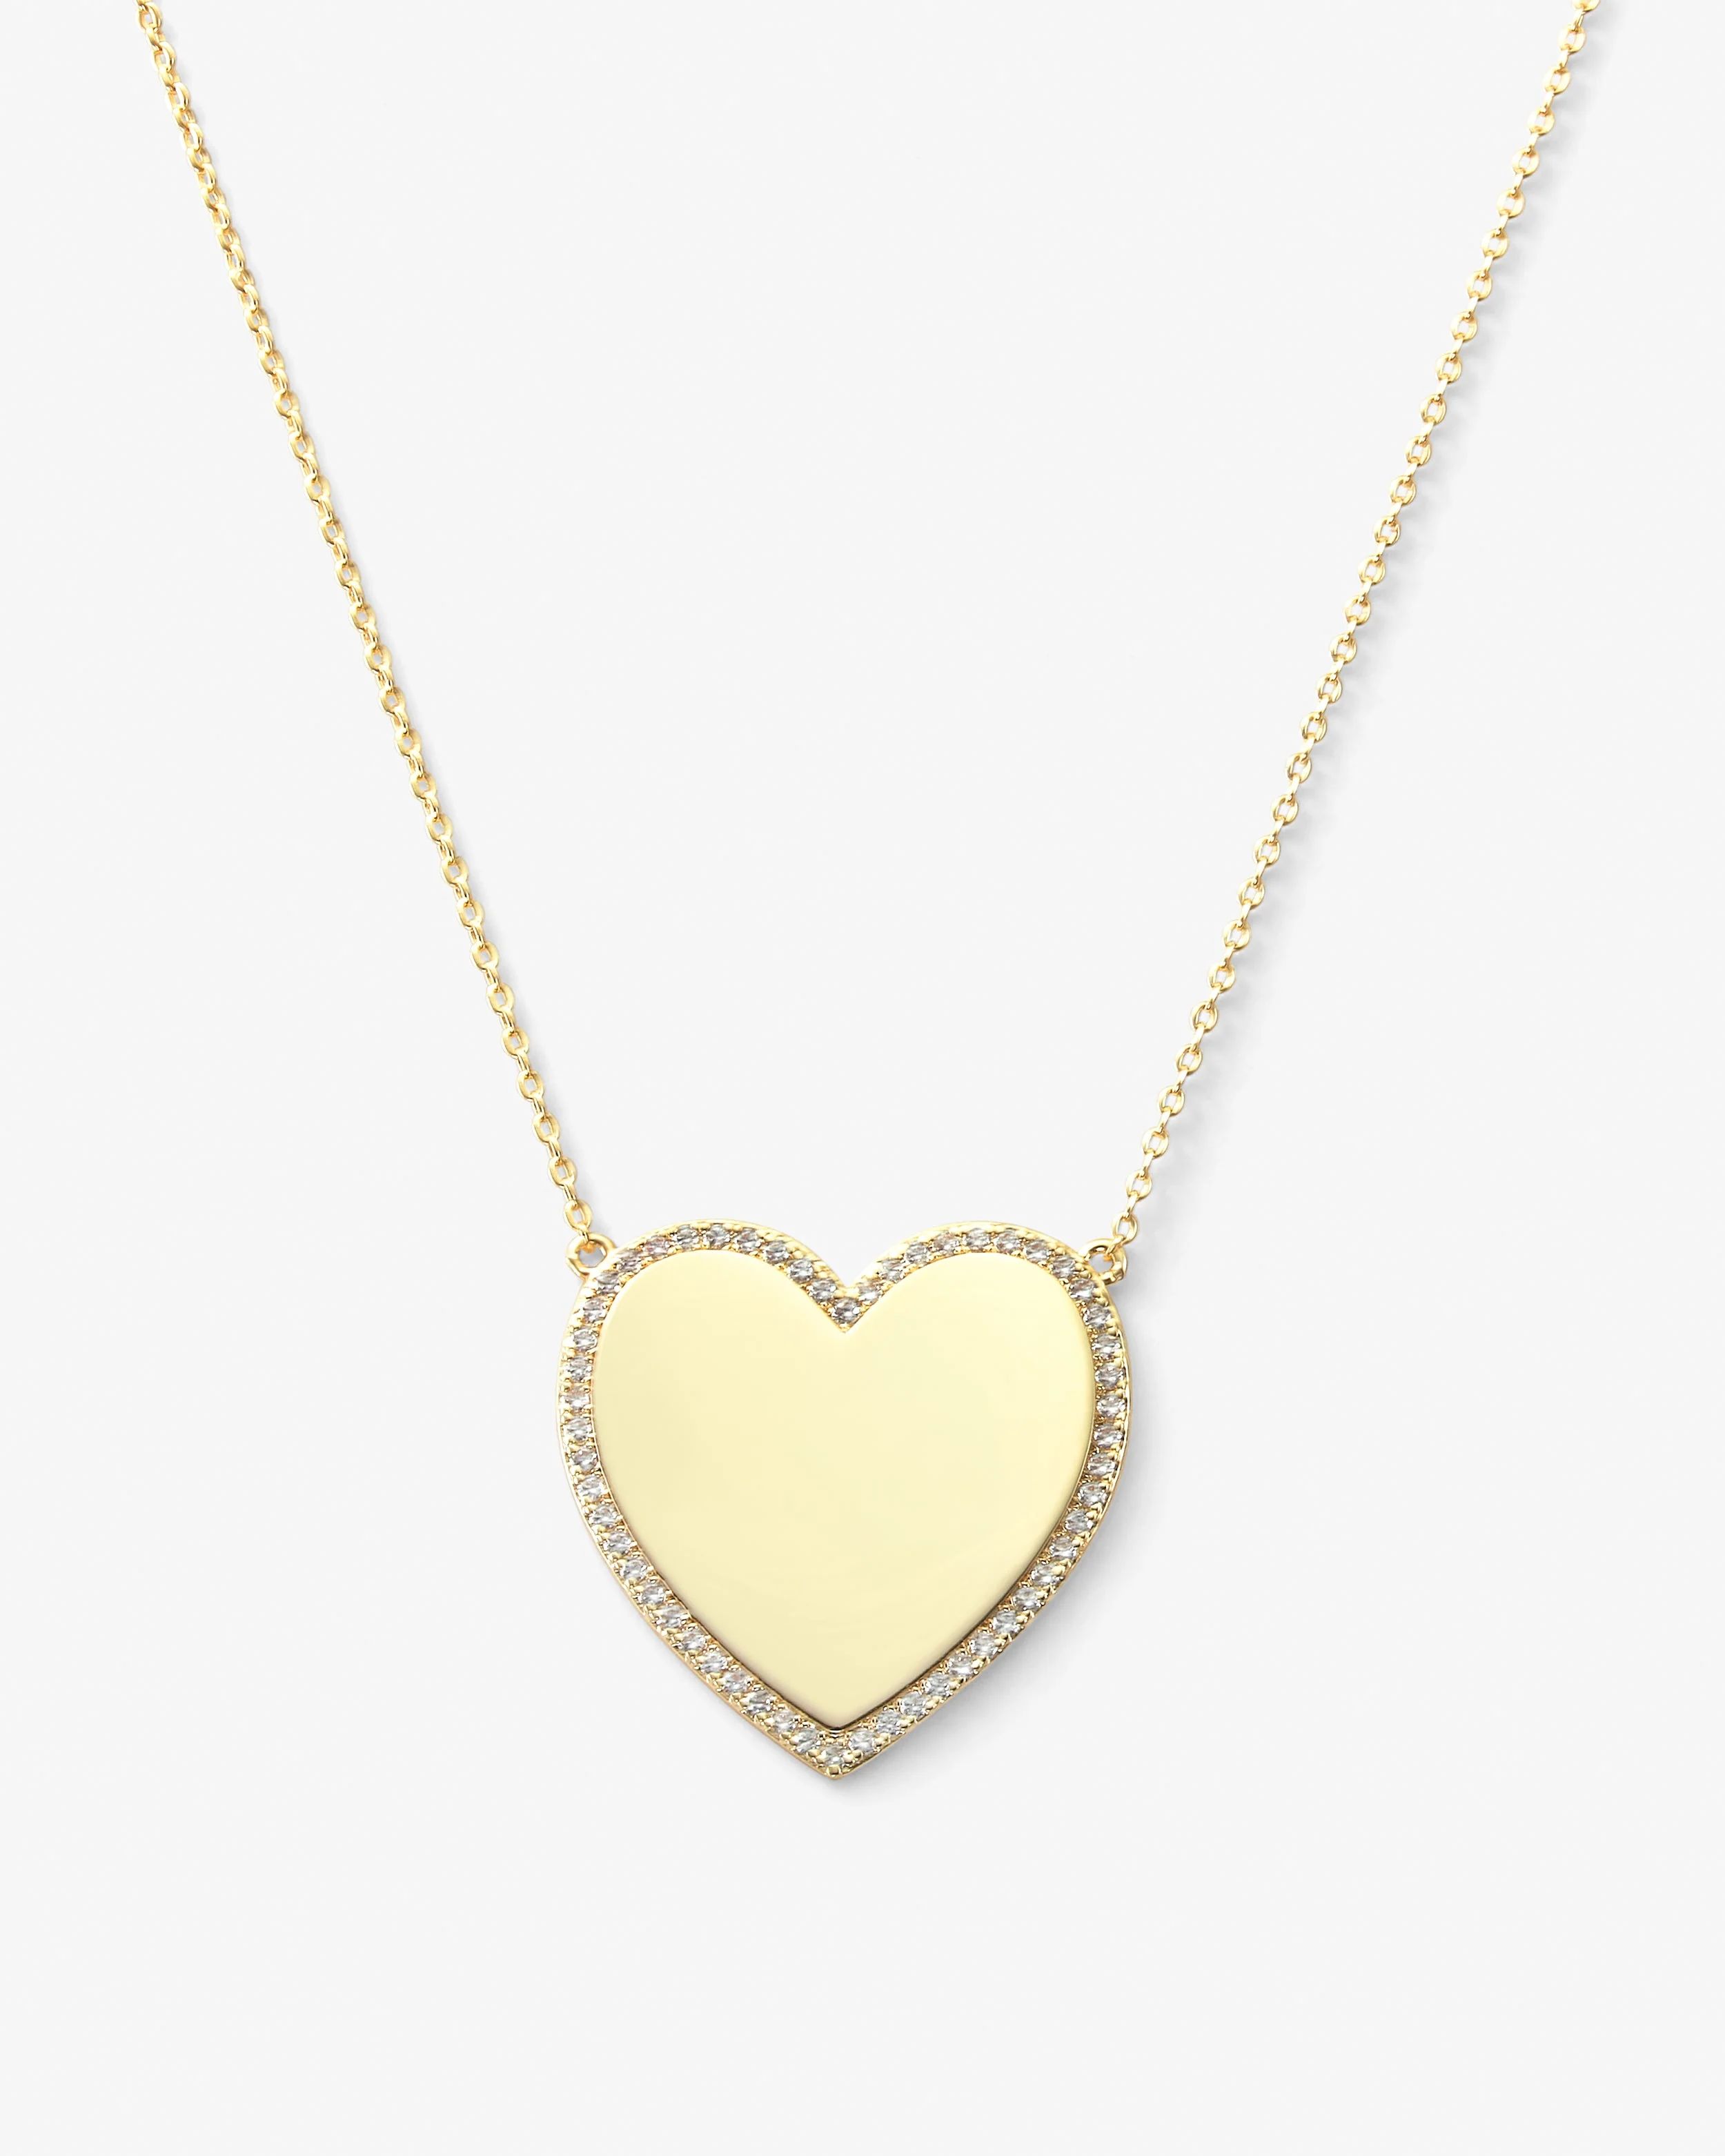 XL You Have My Heart Pave Necklace 15" - Gold|White Diamondettes | Melinda Maria